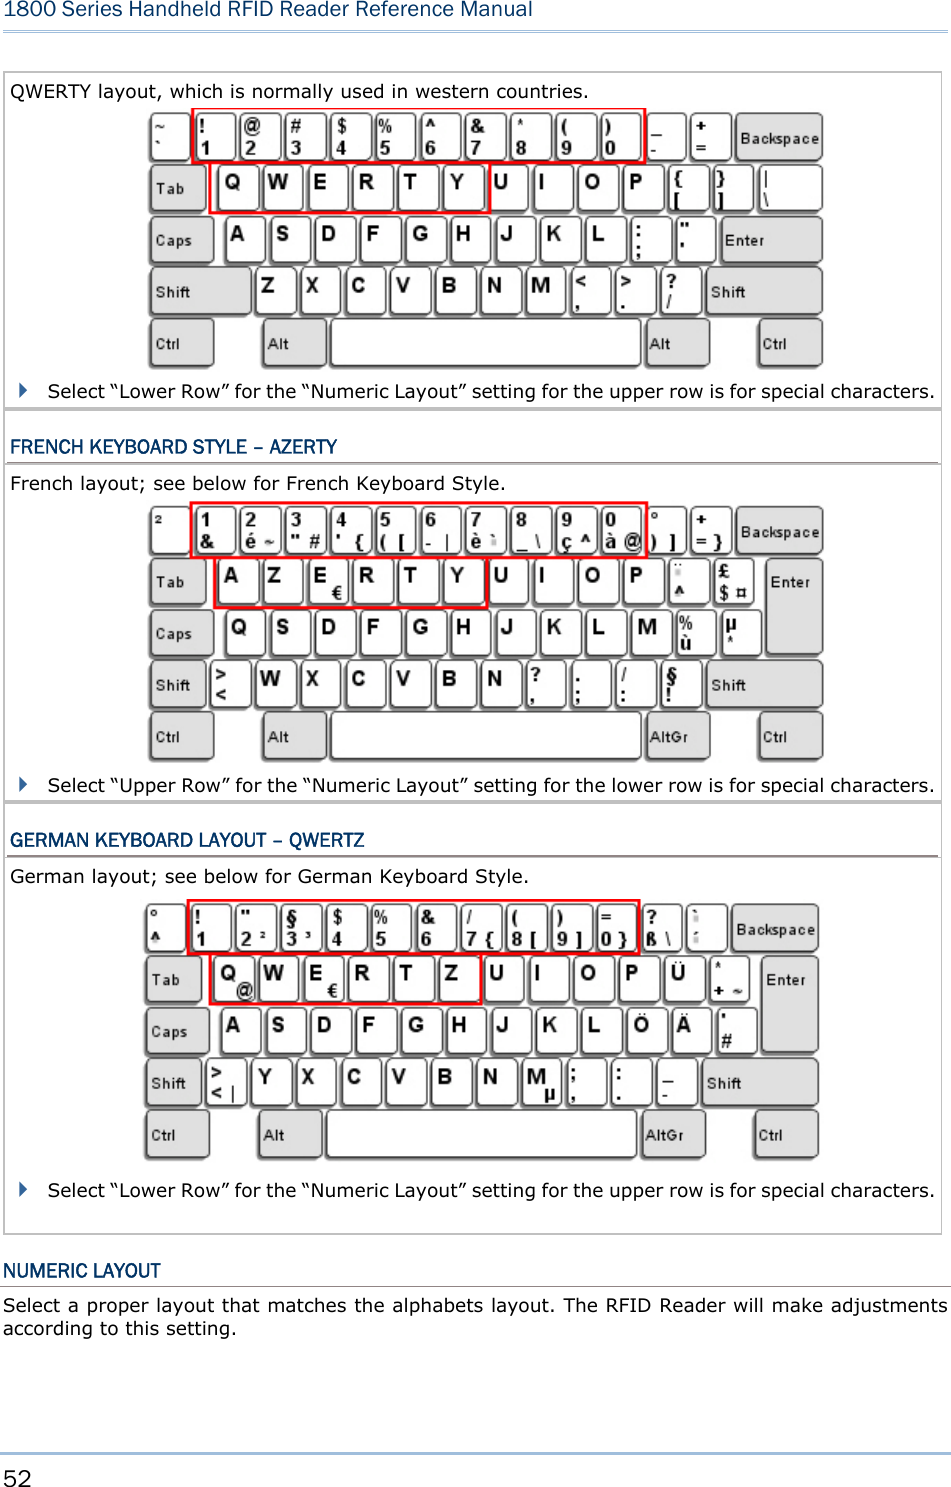 52  1800 Series Handheld RFID Reader Reference Manual  QWERTY layout, which is normally used in western countries.                  Select “Lower Row” for the “Numeric Layout” setting for the upper row is for special characters.  FRENCH KEYBOARD STYLE – AZERTY French layout; see below for French Keyboard Style.                  Select “Upper Row” for the “Numeric Layout” setting for the lower row is for special characters.  GERMAN KEYBOARD LAYOUT – QWERTZ German layout; see below for German Keyboard Style.                Select “Lower Row” for the “Numeric Layout” setting for the upper row is for special characters.   NUMERIC LAYOUT Select a proper layout that matches the alphabets layout. The RFID Reader will make adjustments according to this setting.    